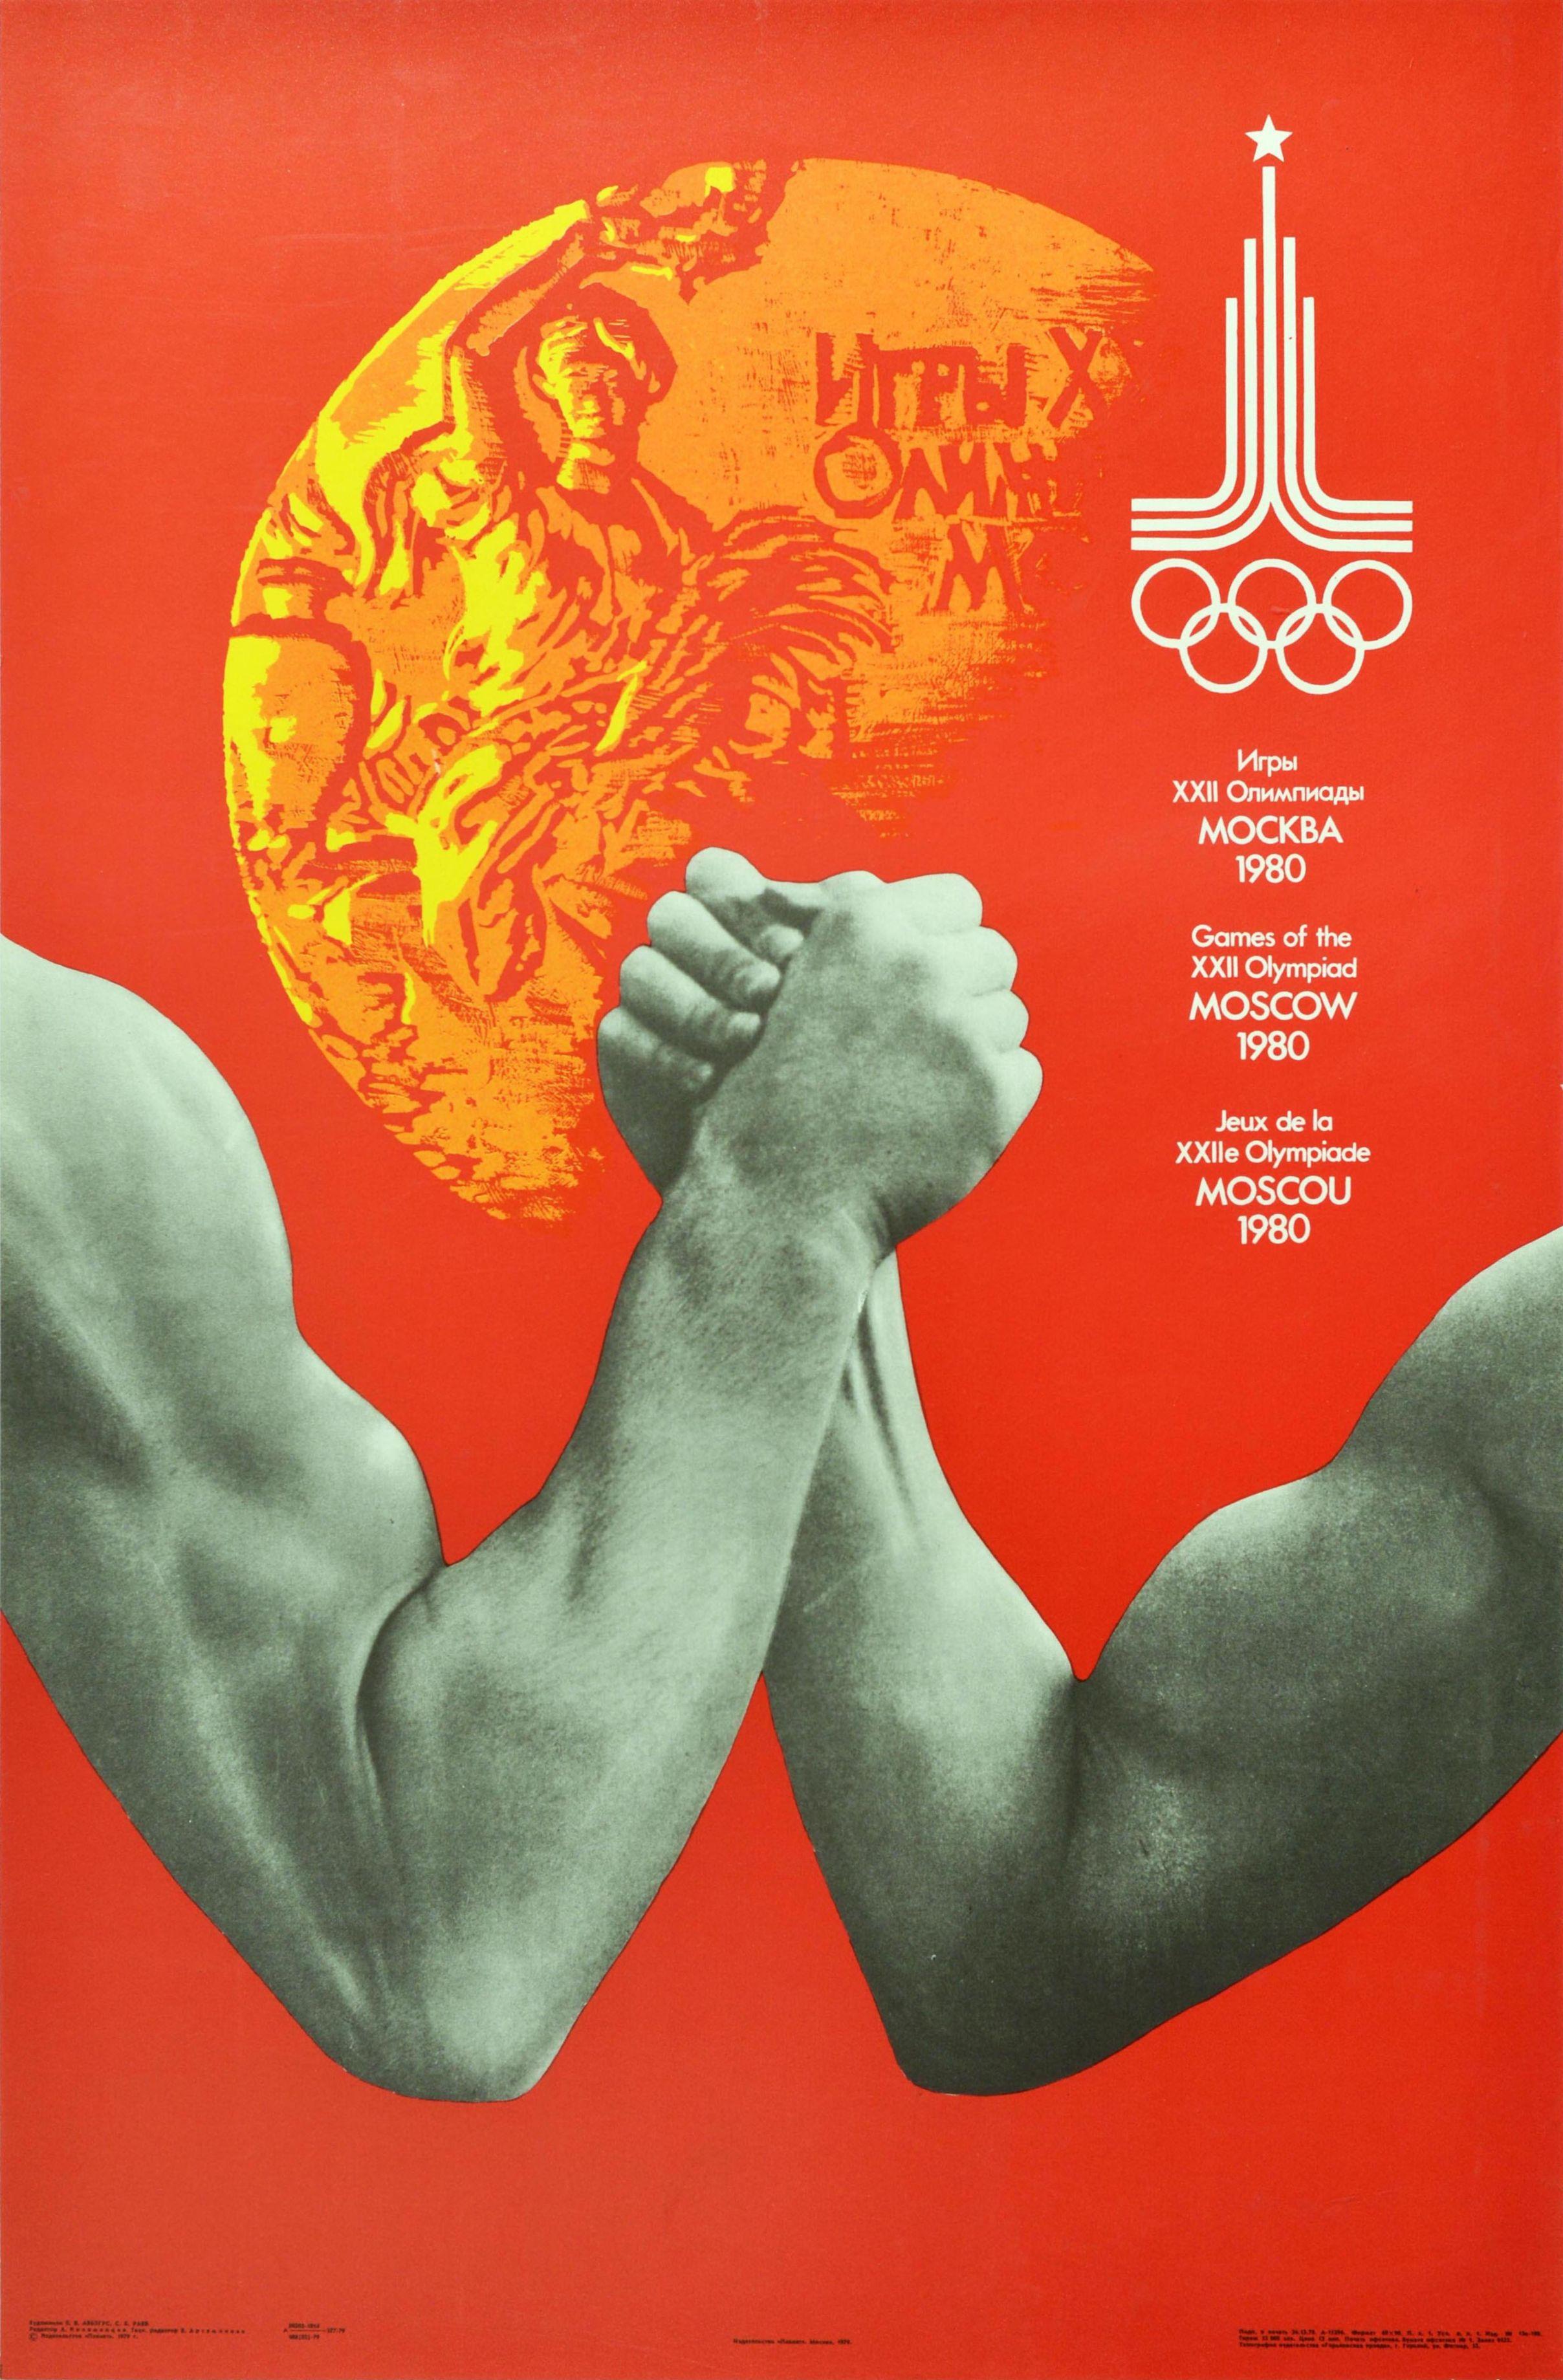 Original vintage sports poster issued for the 1980 Summer Olympic Games in Moscow Russia featuring a black and white photograph of two strong arms interlocked in an arm wrestle representing the arm wrestling tournament with an illustration of a Gold